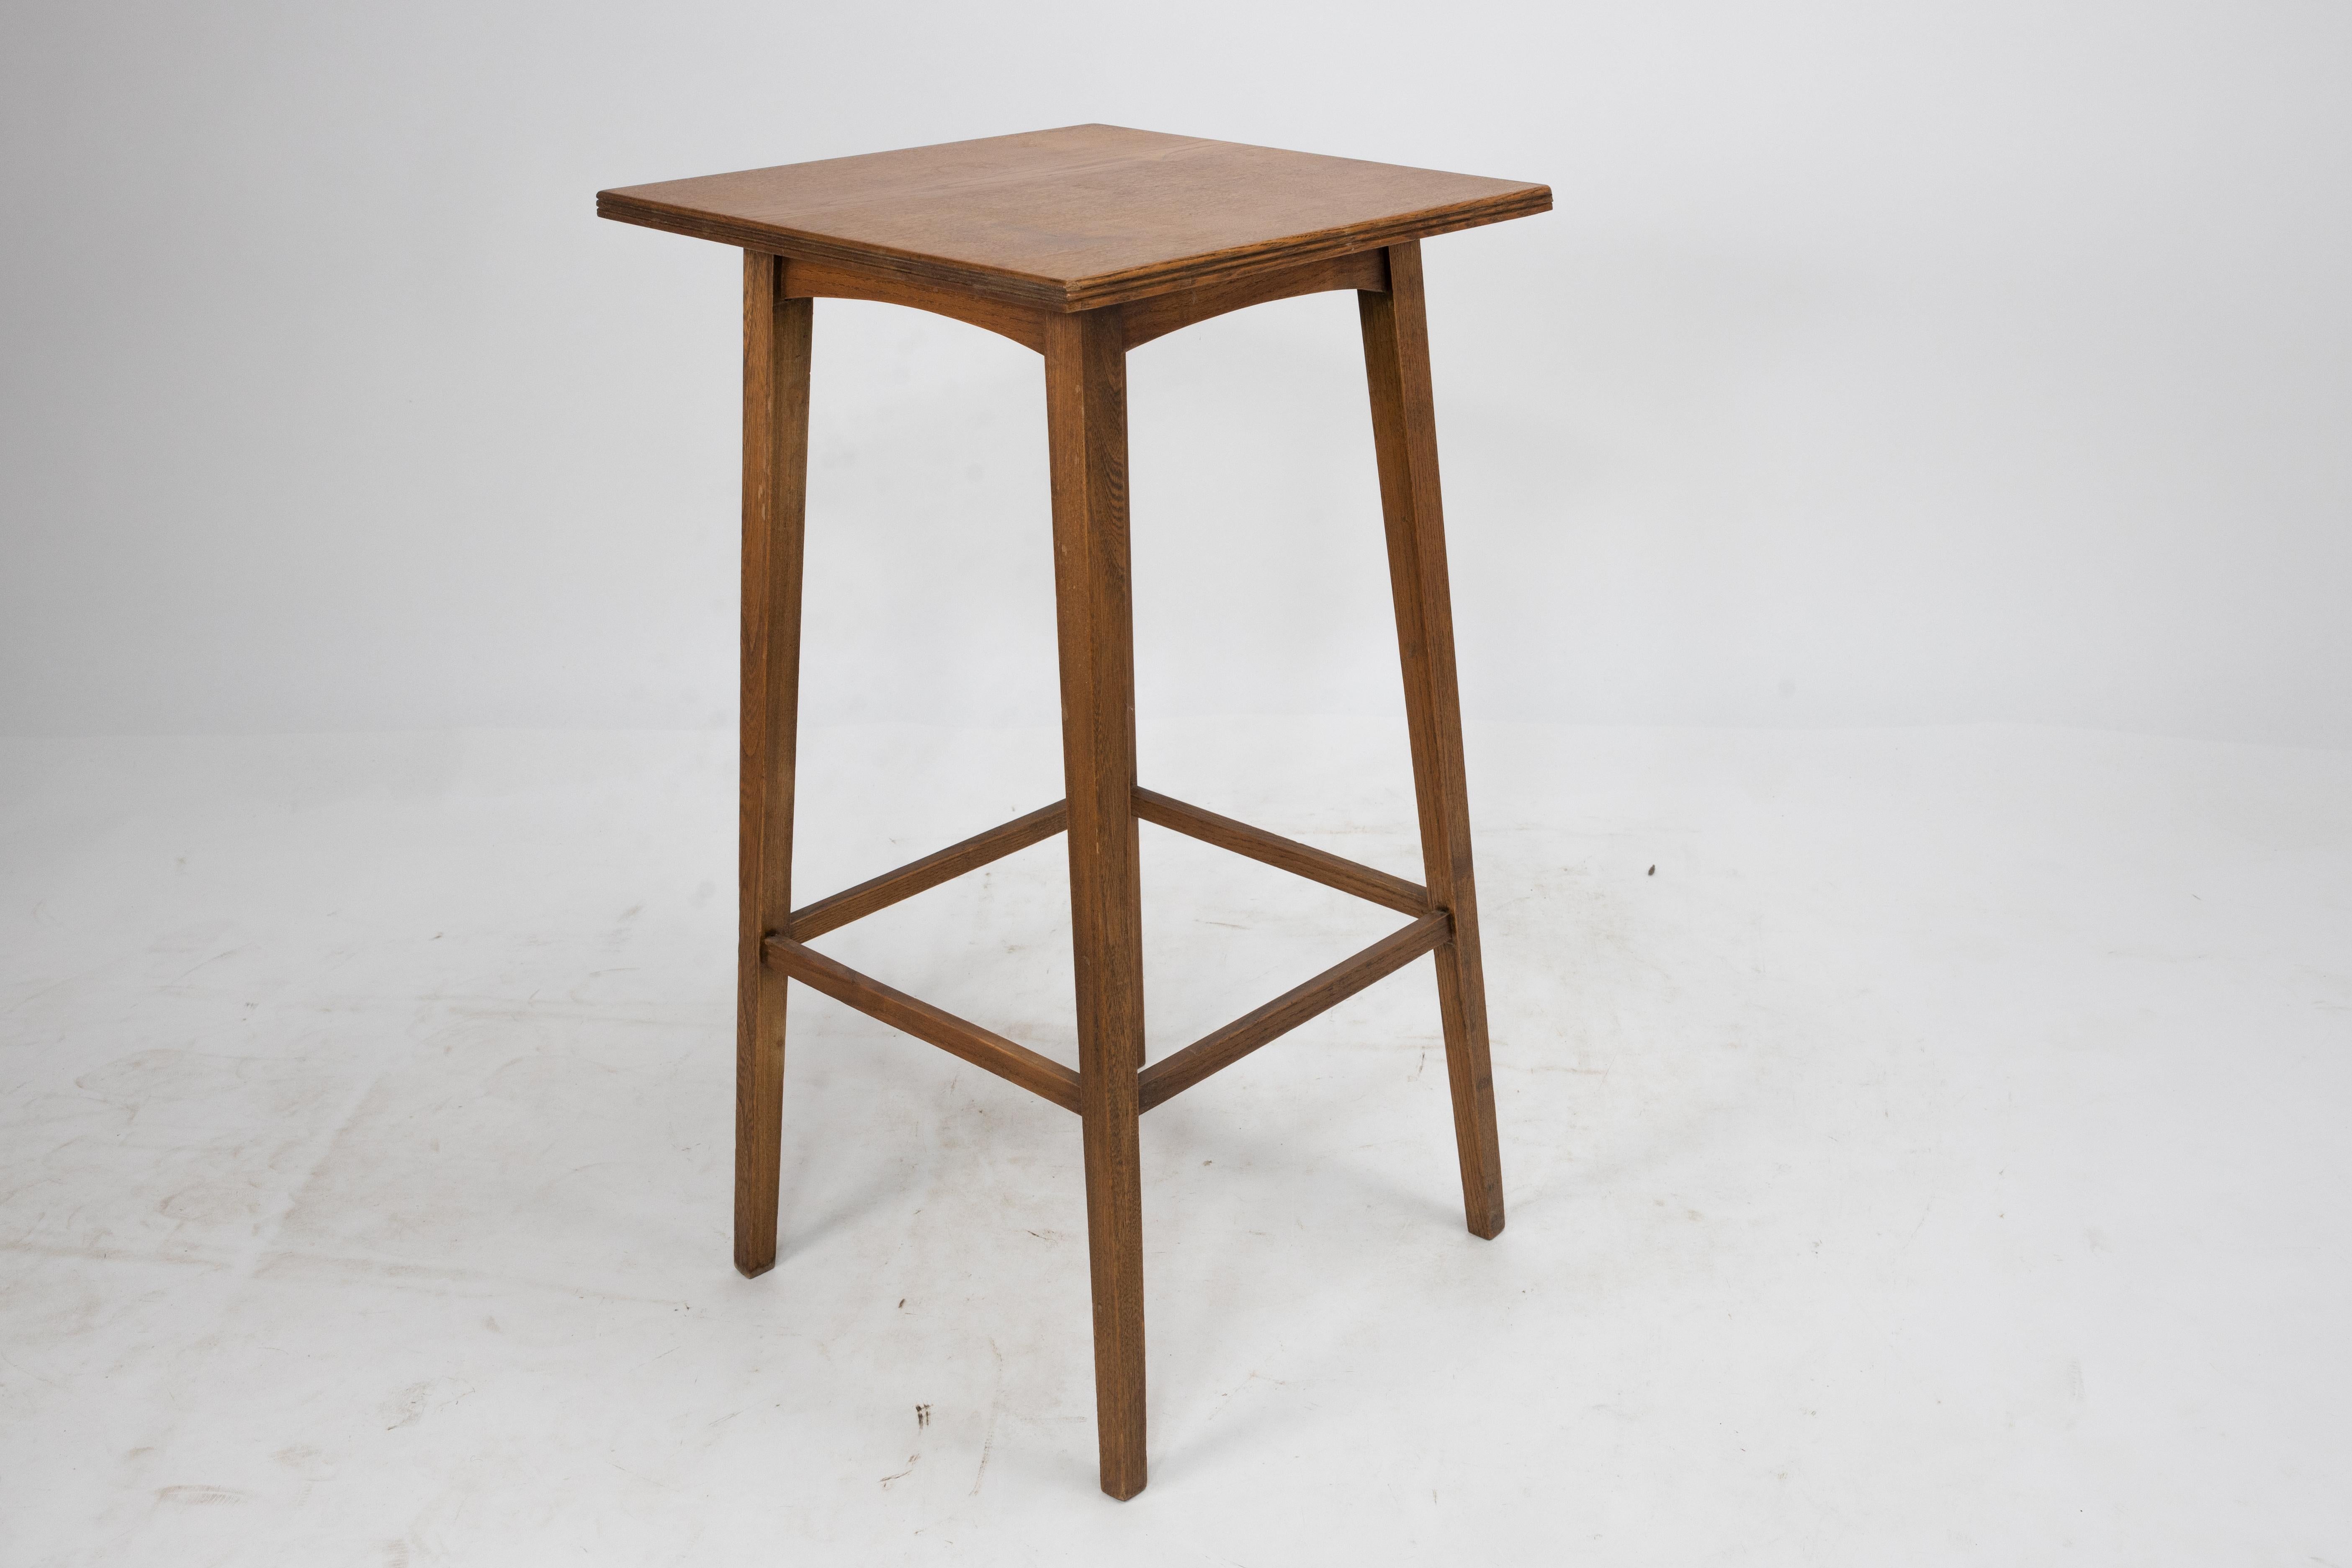 Shapland & Petter A small Arts & Crafts Ash side table with square tapering legs In Good Condition For Sale In London, GB